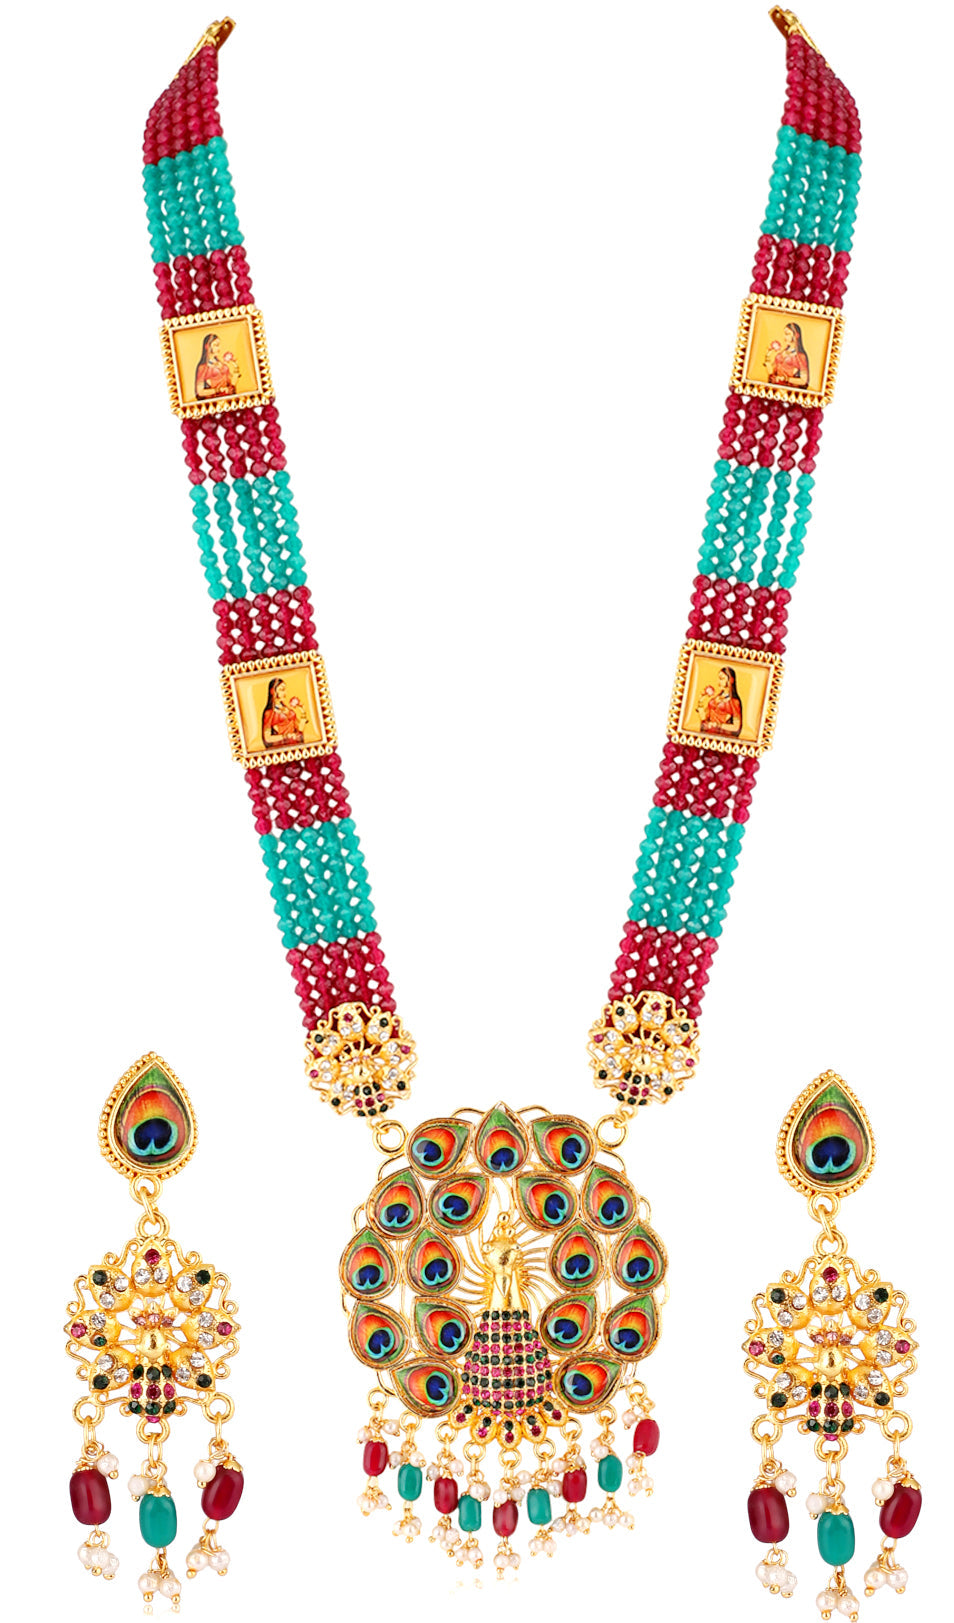 Mekkna Presents Traditional Multicolor Gold Plated Rani-Haar with Earrings for Women | Buy This Jewellery Online from Mekkna.